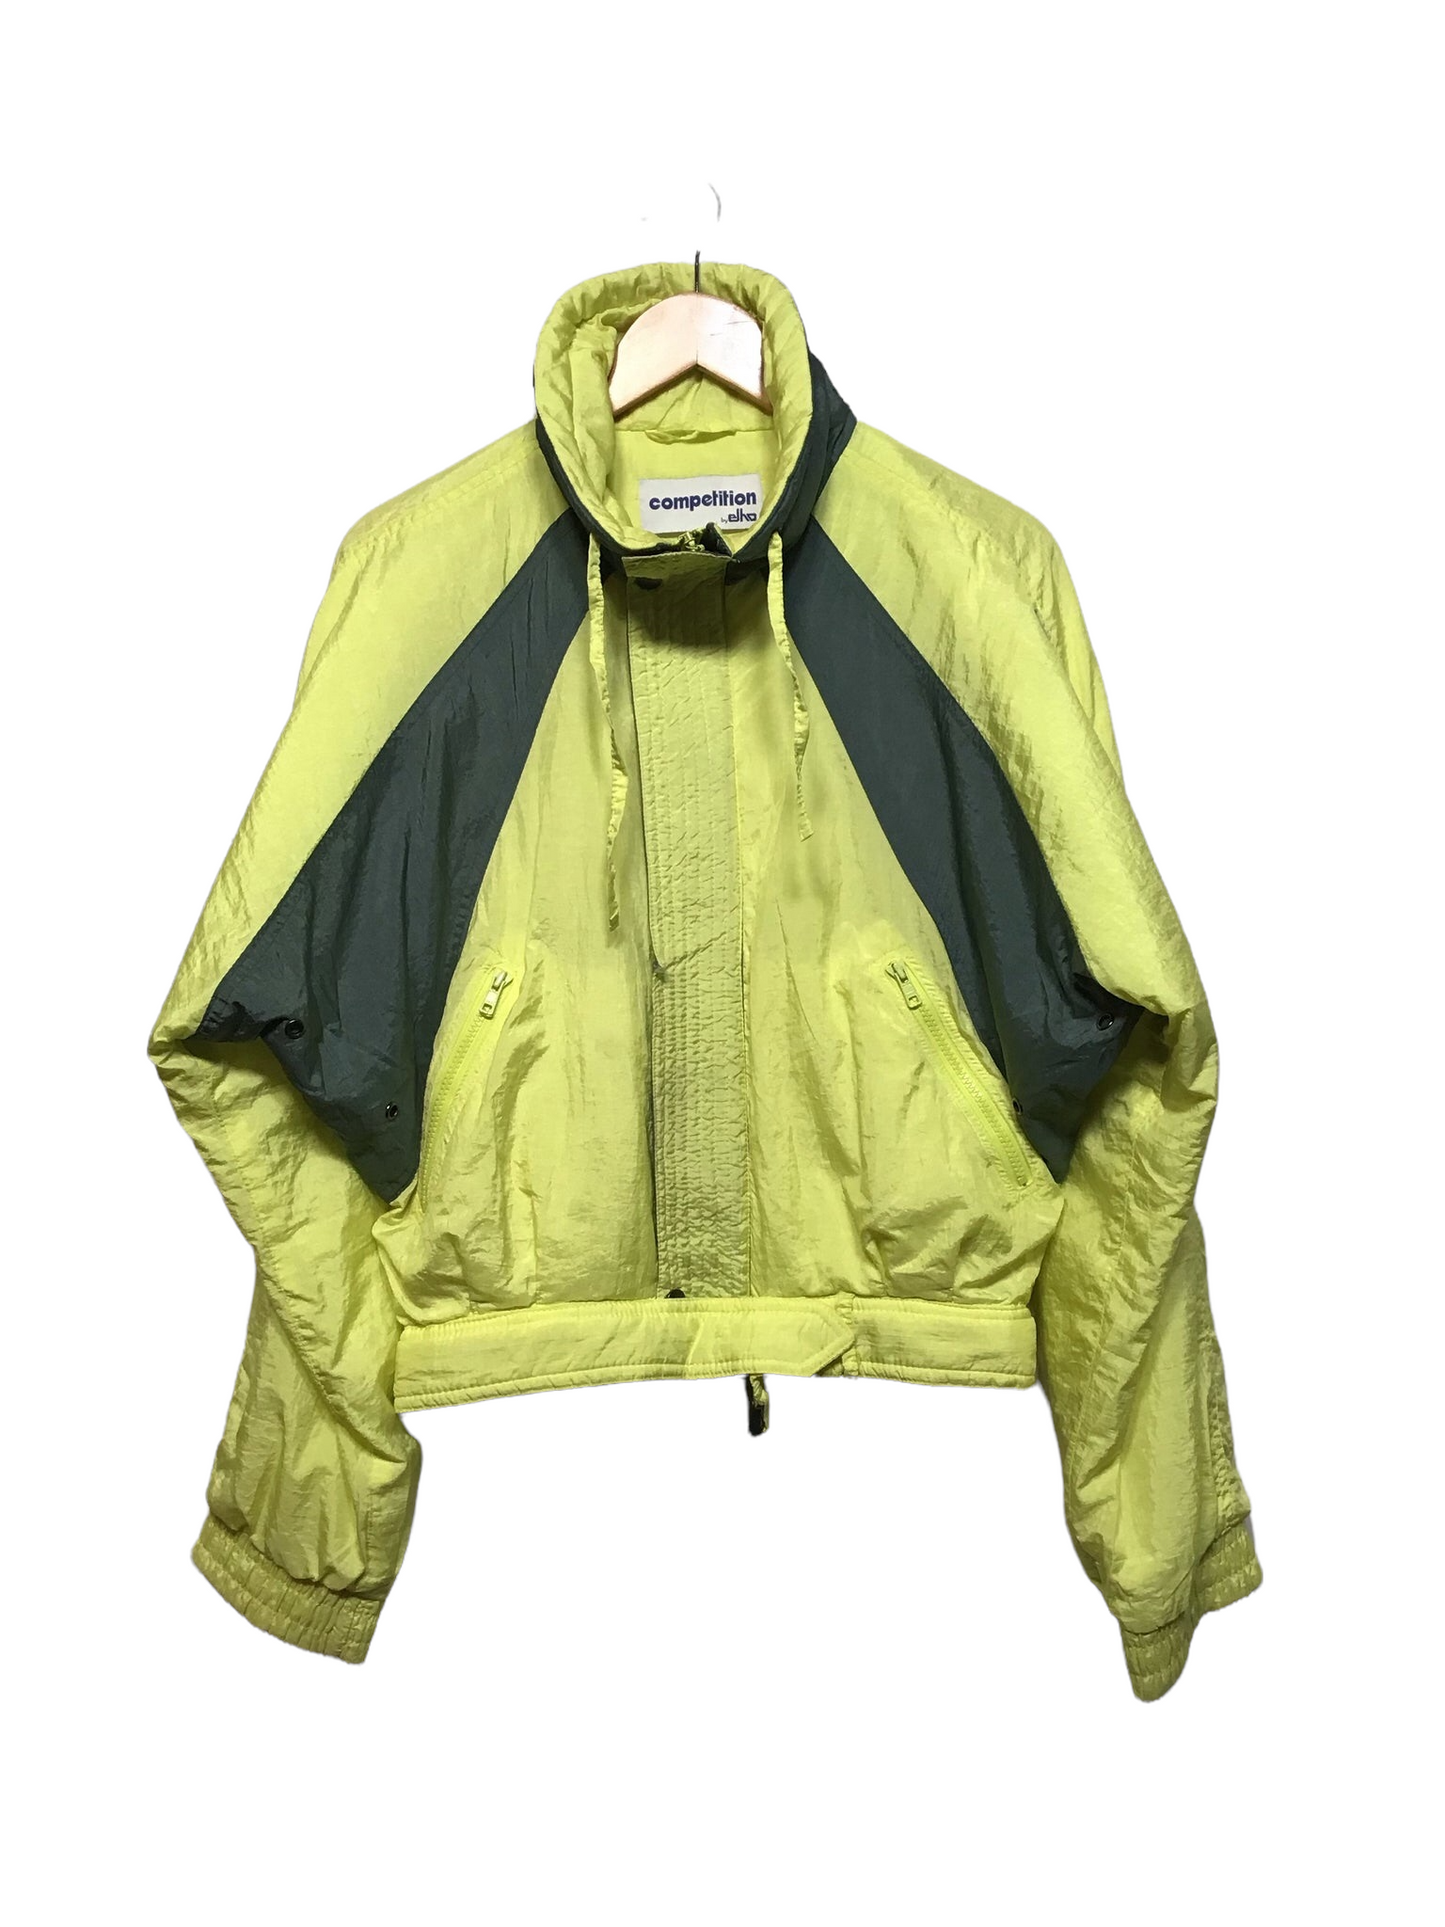 Competition Yellow Sports Ski Coat (Size L)